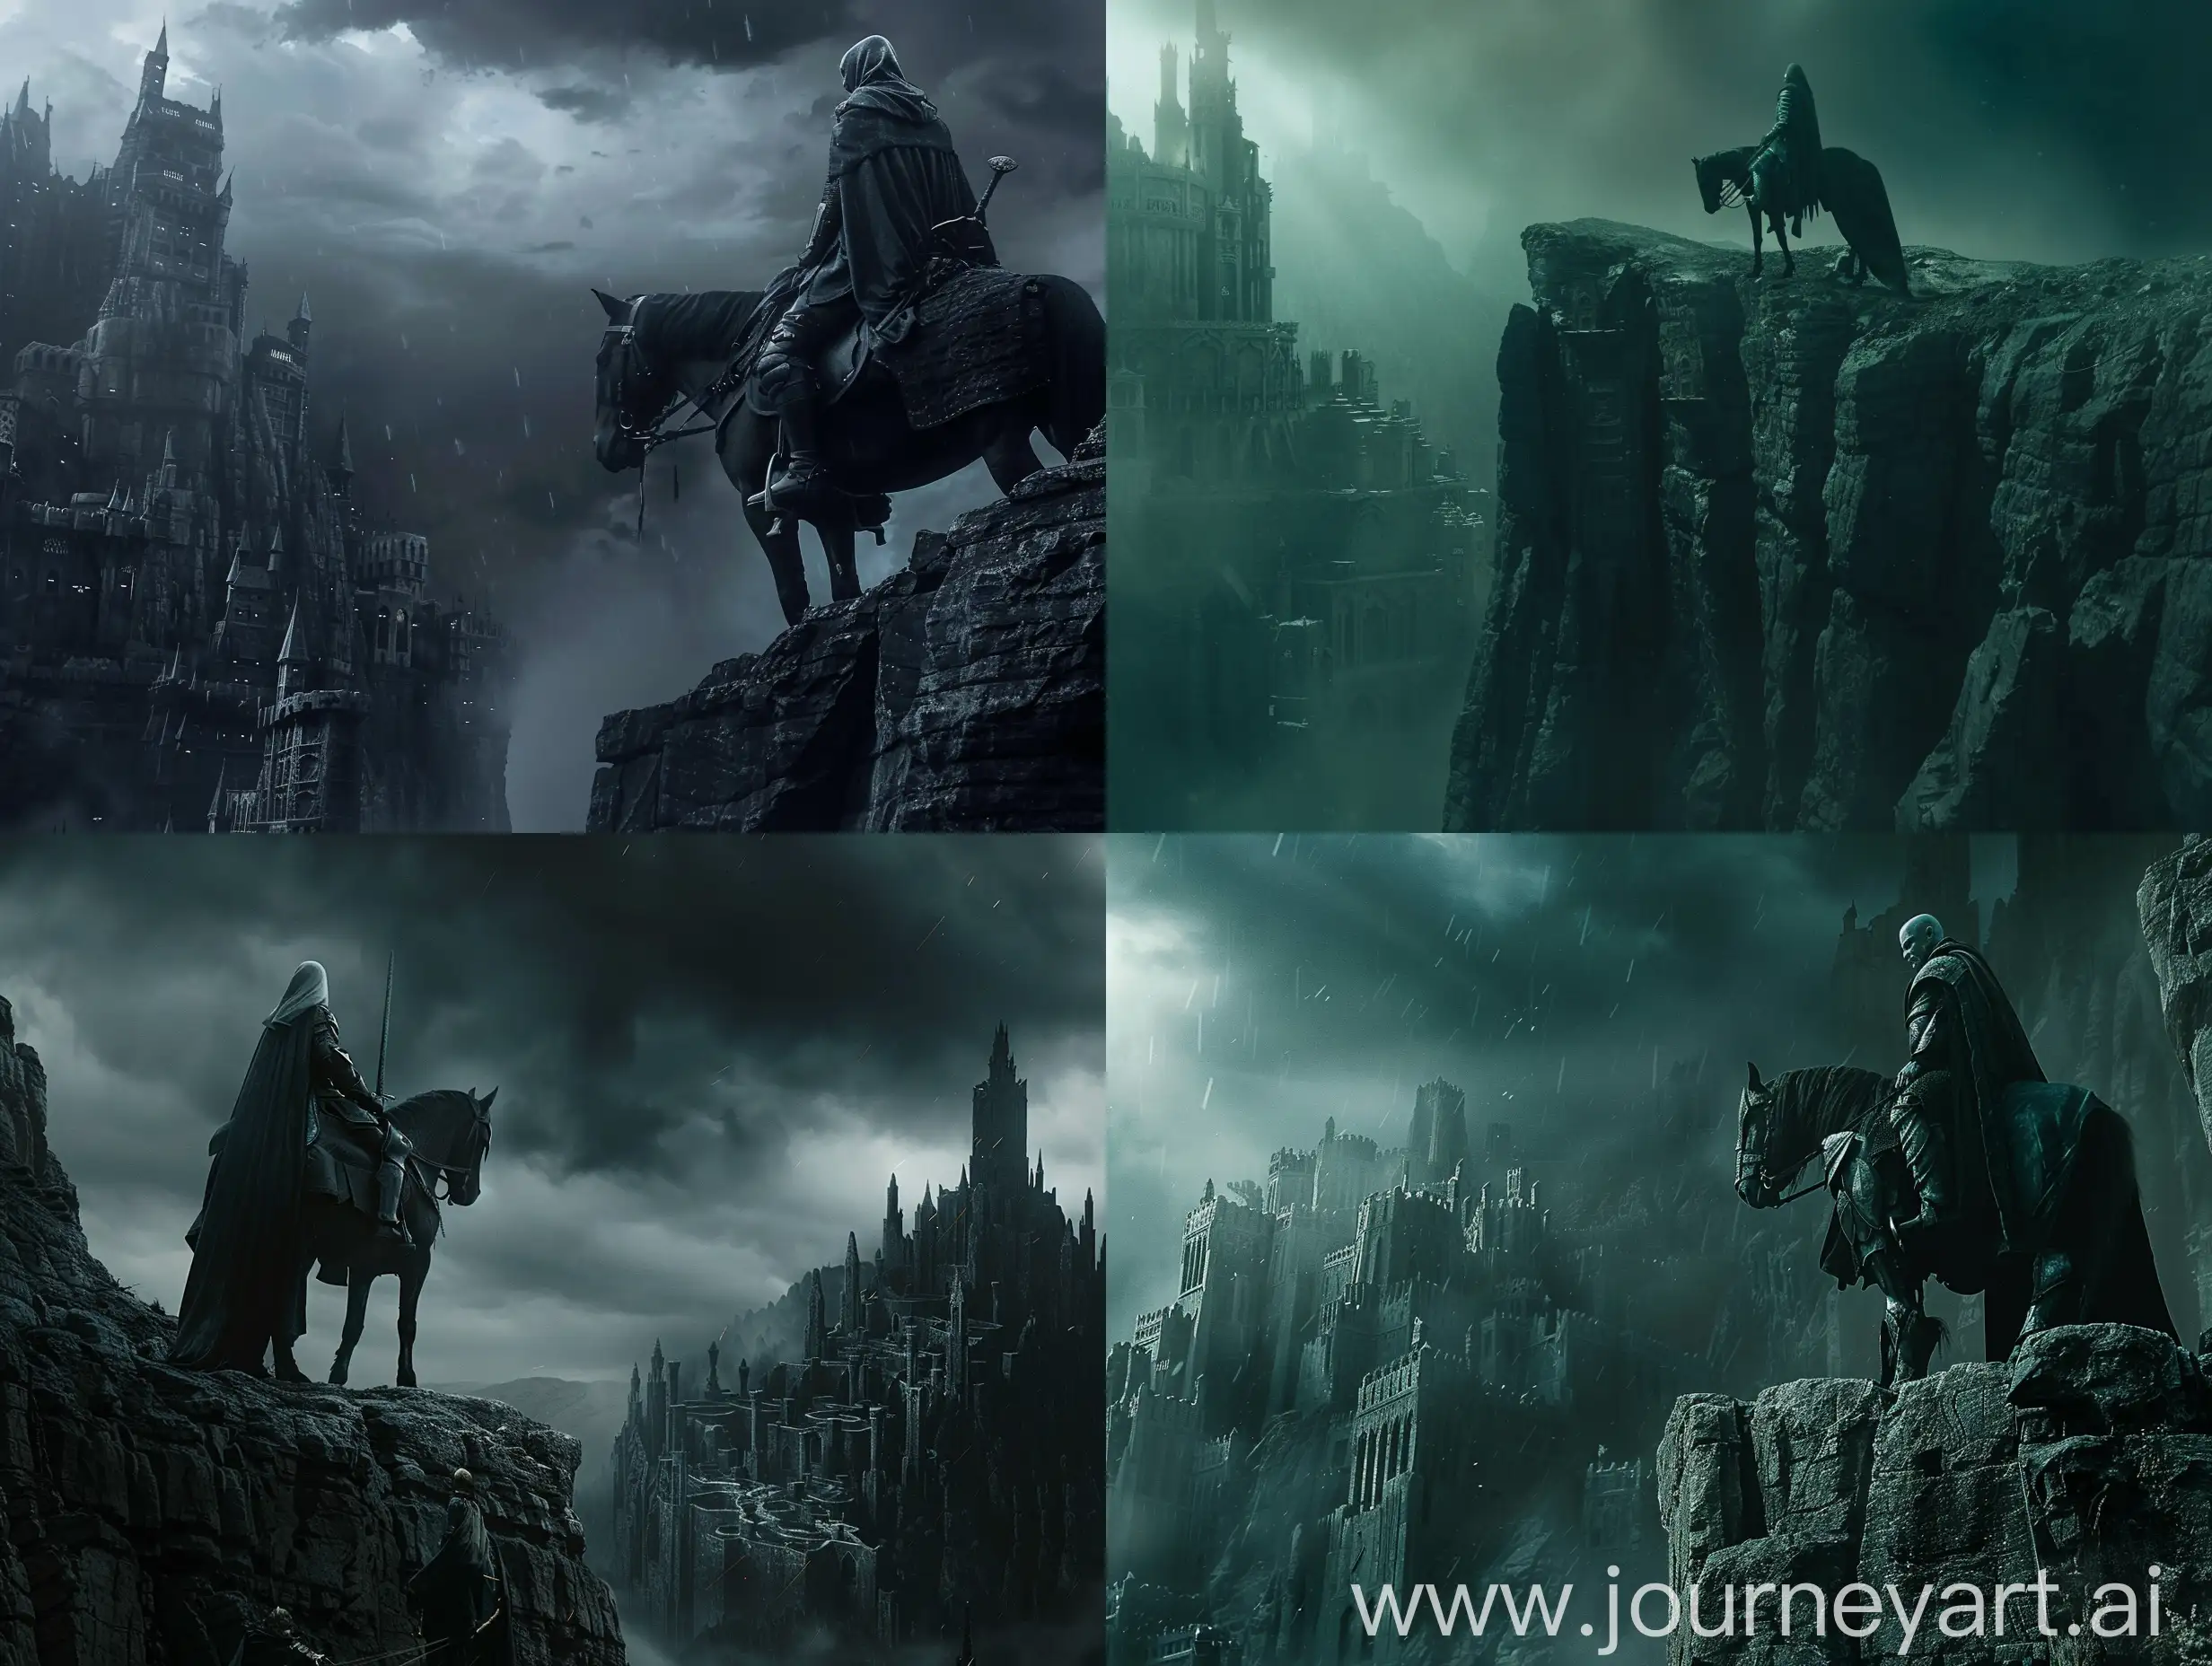 Mysterious-Nazgul-Overlooking-Dark-City-from-Cliff